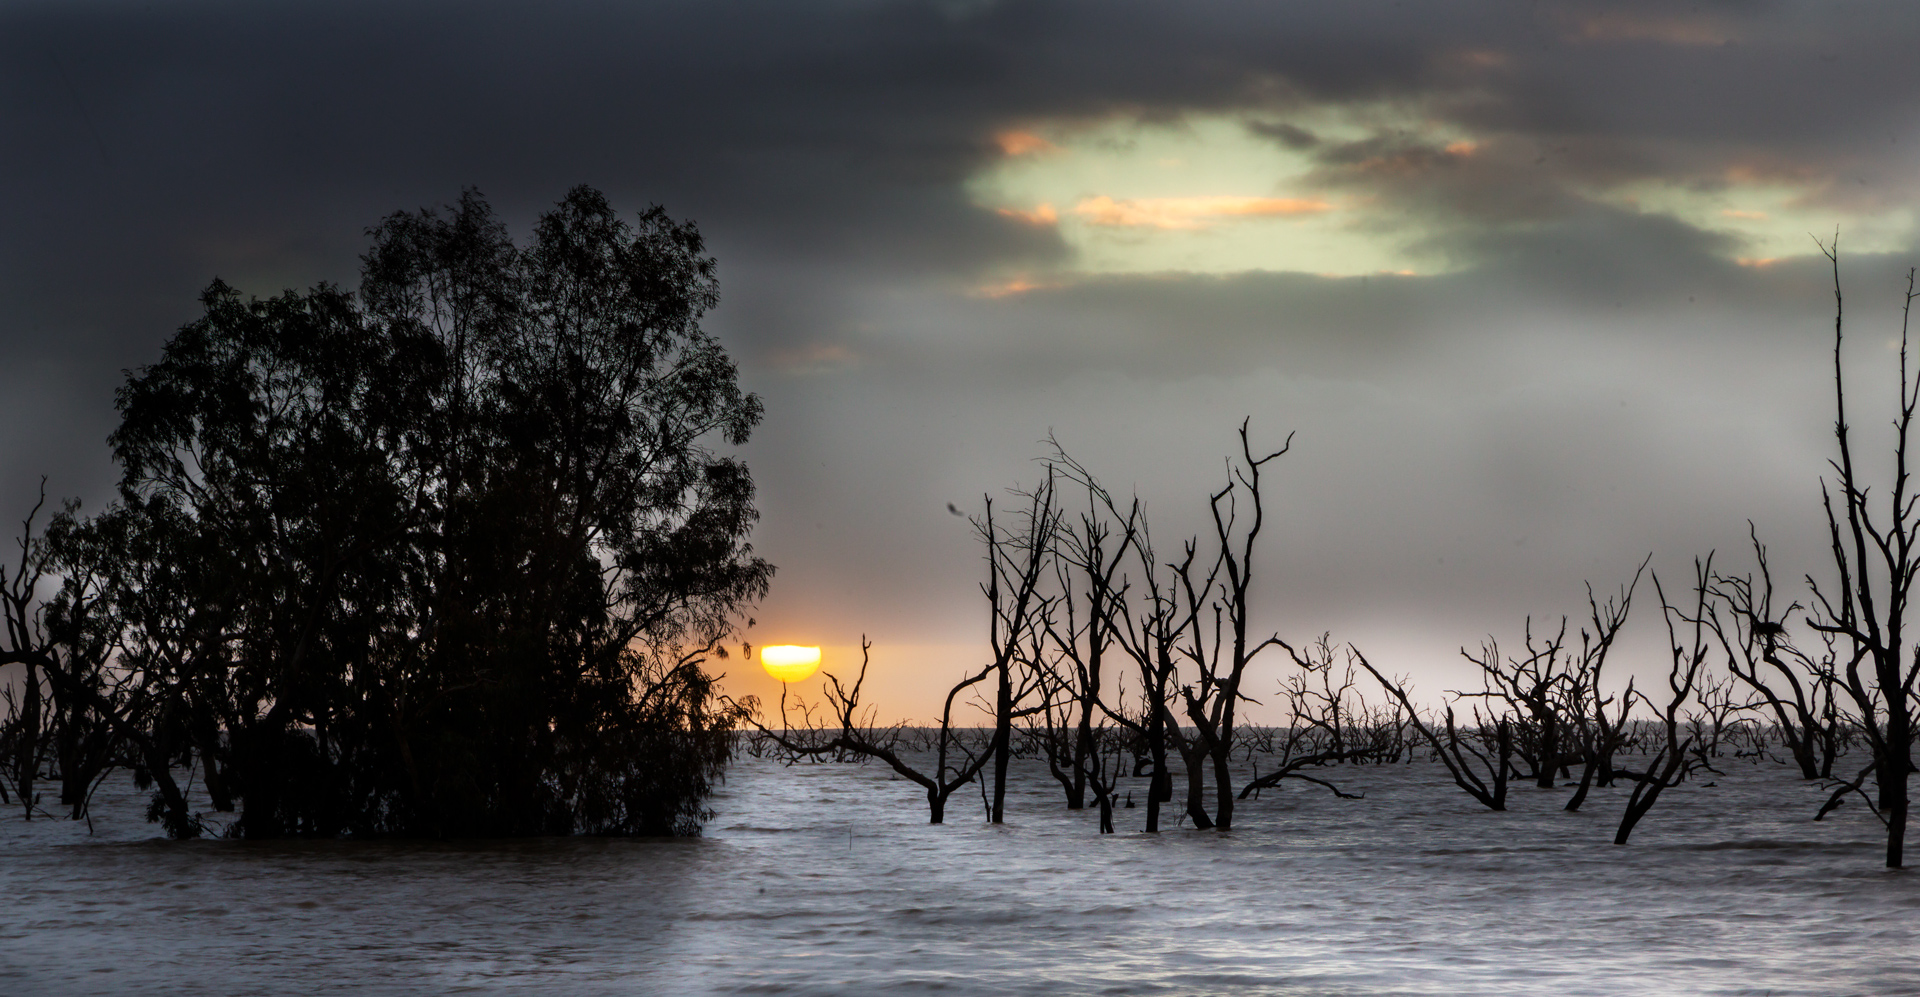 Sunset at Menindee by Danny Dunne, QPSA